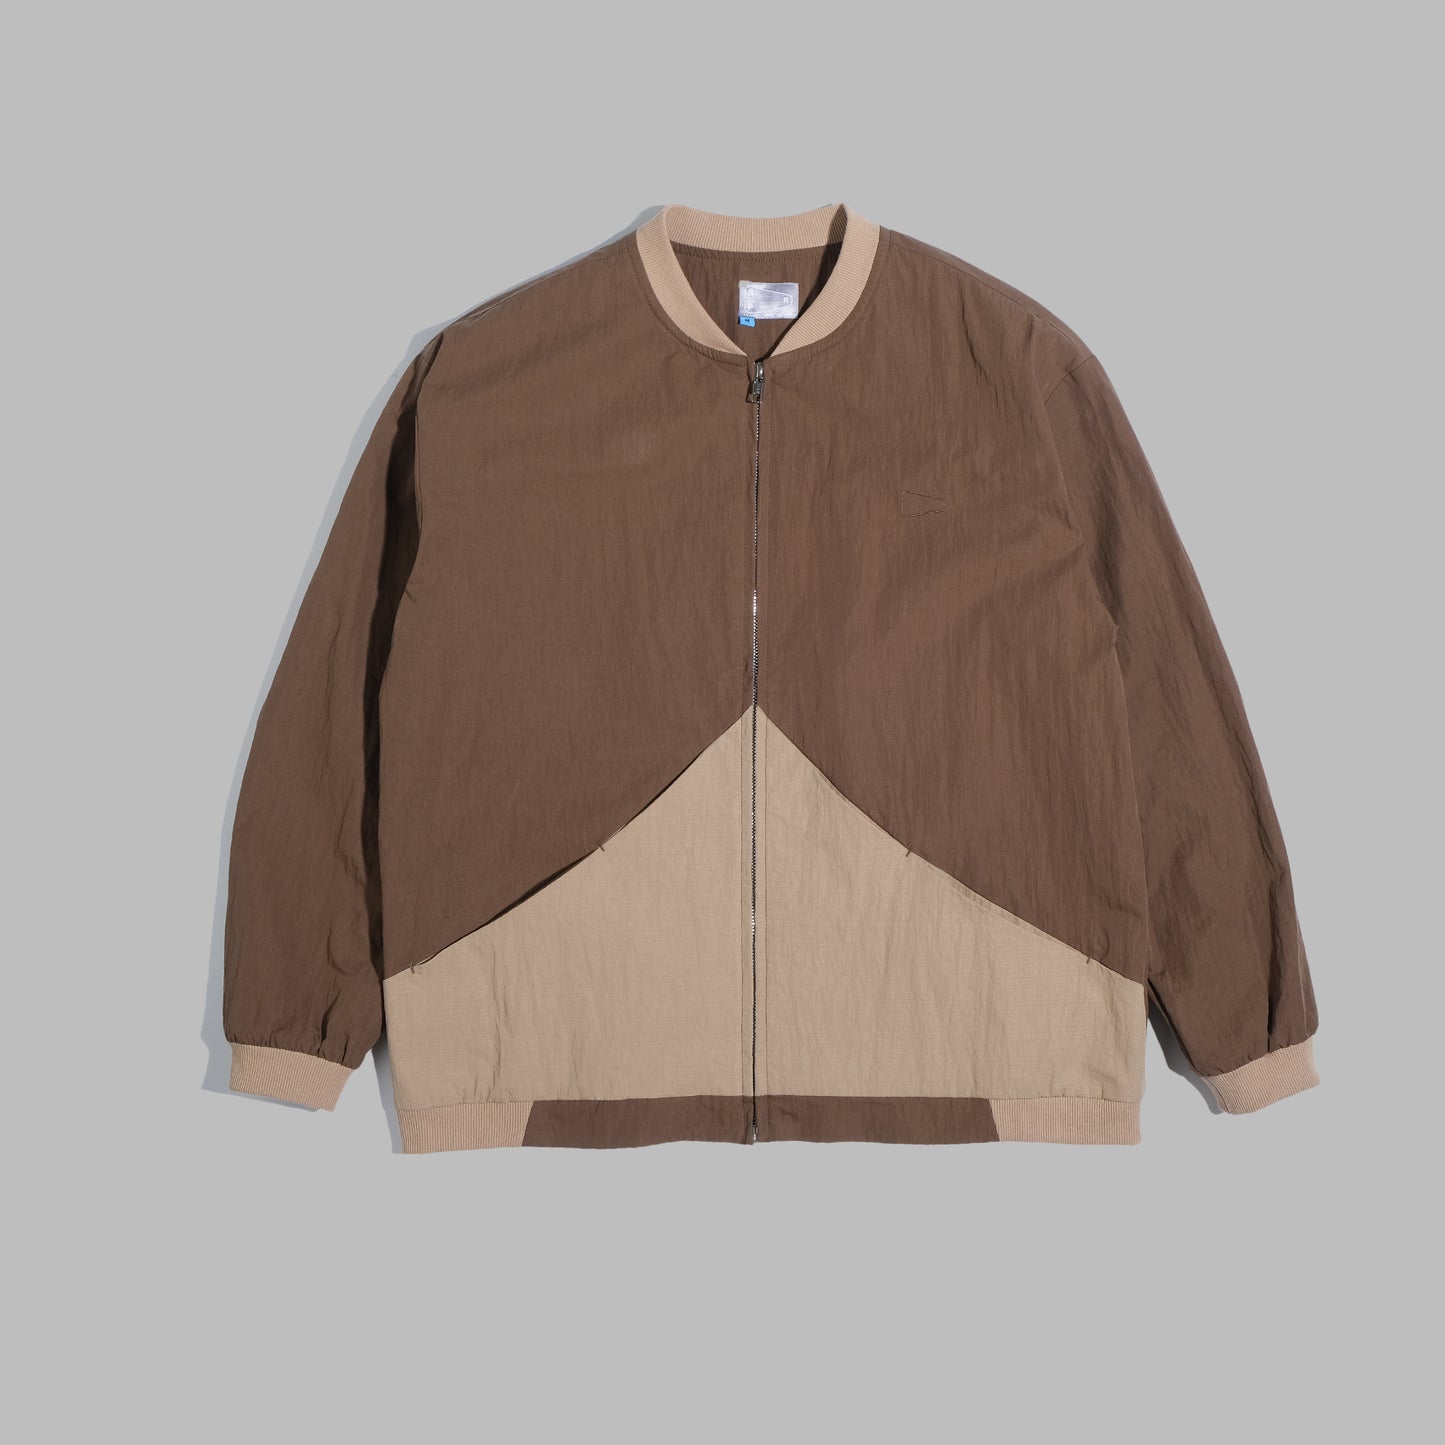 Coach Jacket / Cotton Polyester - Brown